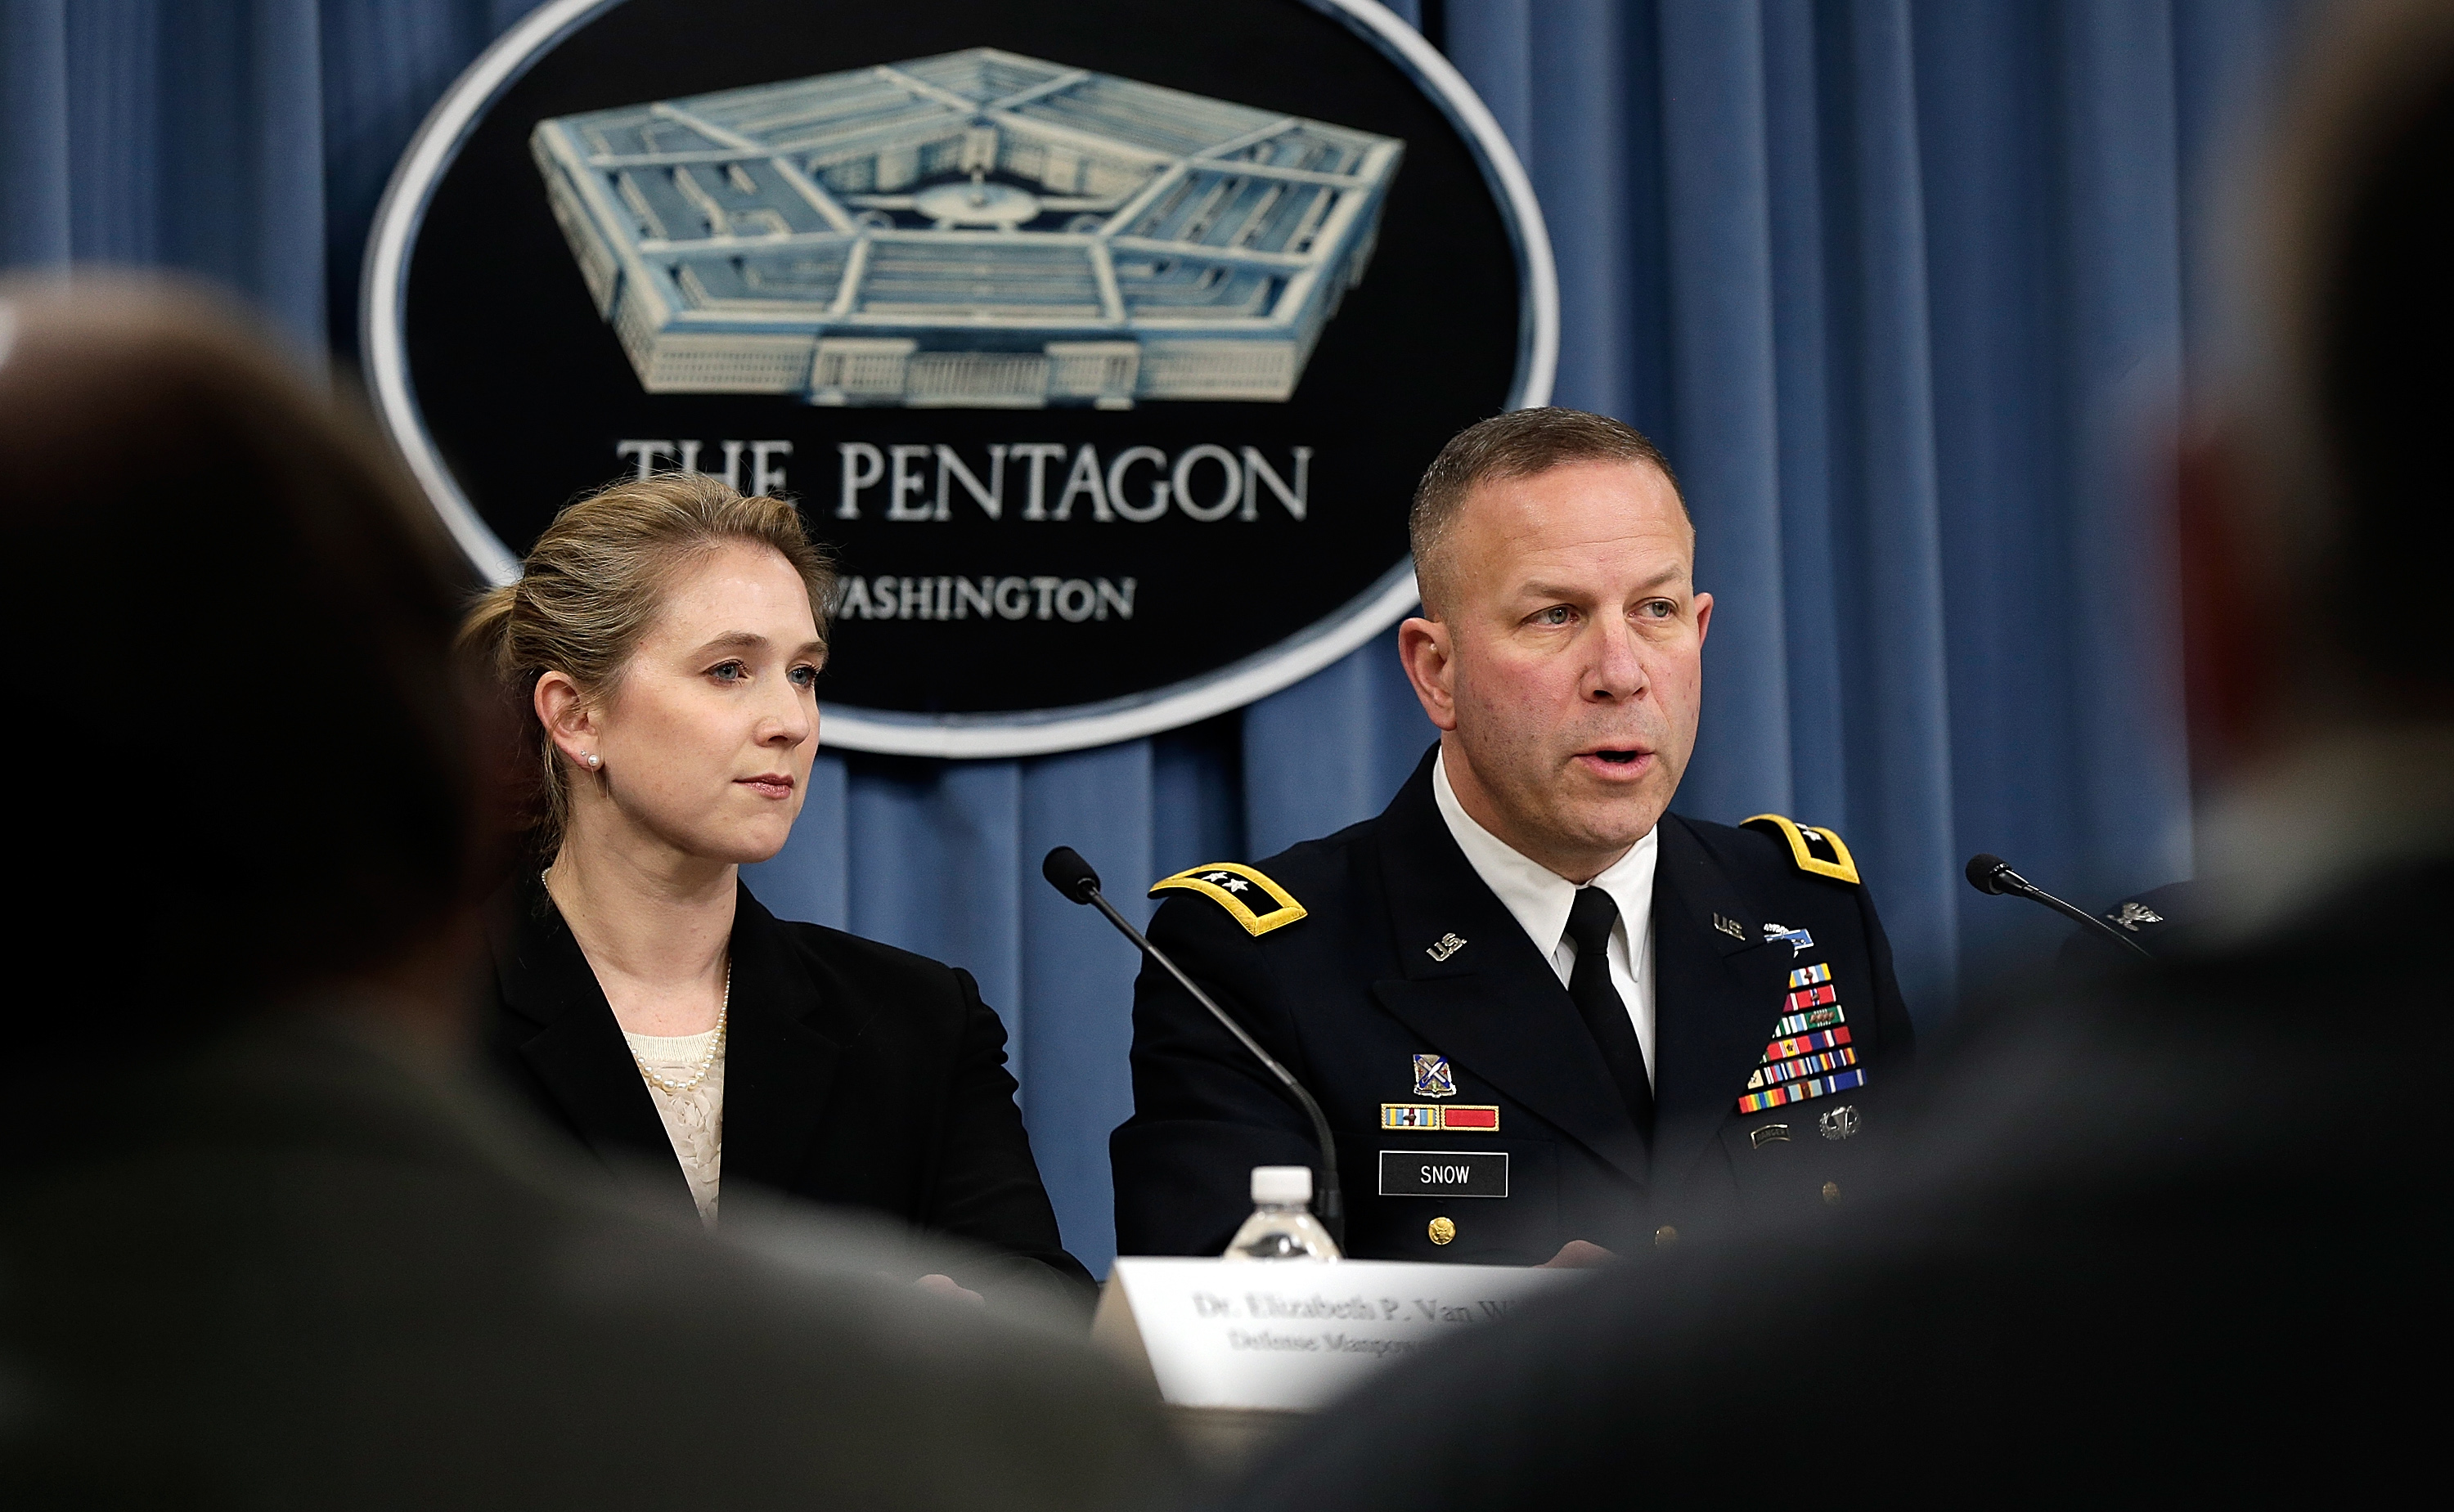 ARLINGTON, VA - JANUARY 10: Army Maj. Gen. Jeffrey Snow (R), director of the Pentagon's Sexual Assault Prevention and Response Office, joins other senior leaders in a press conference at the Pentagon on sexual assaults in the military January 10, 2014 in Arlington, Virginia. From left to right are Dr. Elizabeth Van Winkle and U.S. Army Maj. Gen. Jeffrey Snow. (Win McNamee/Getty Images)